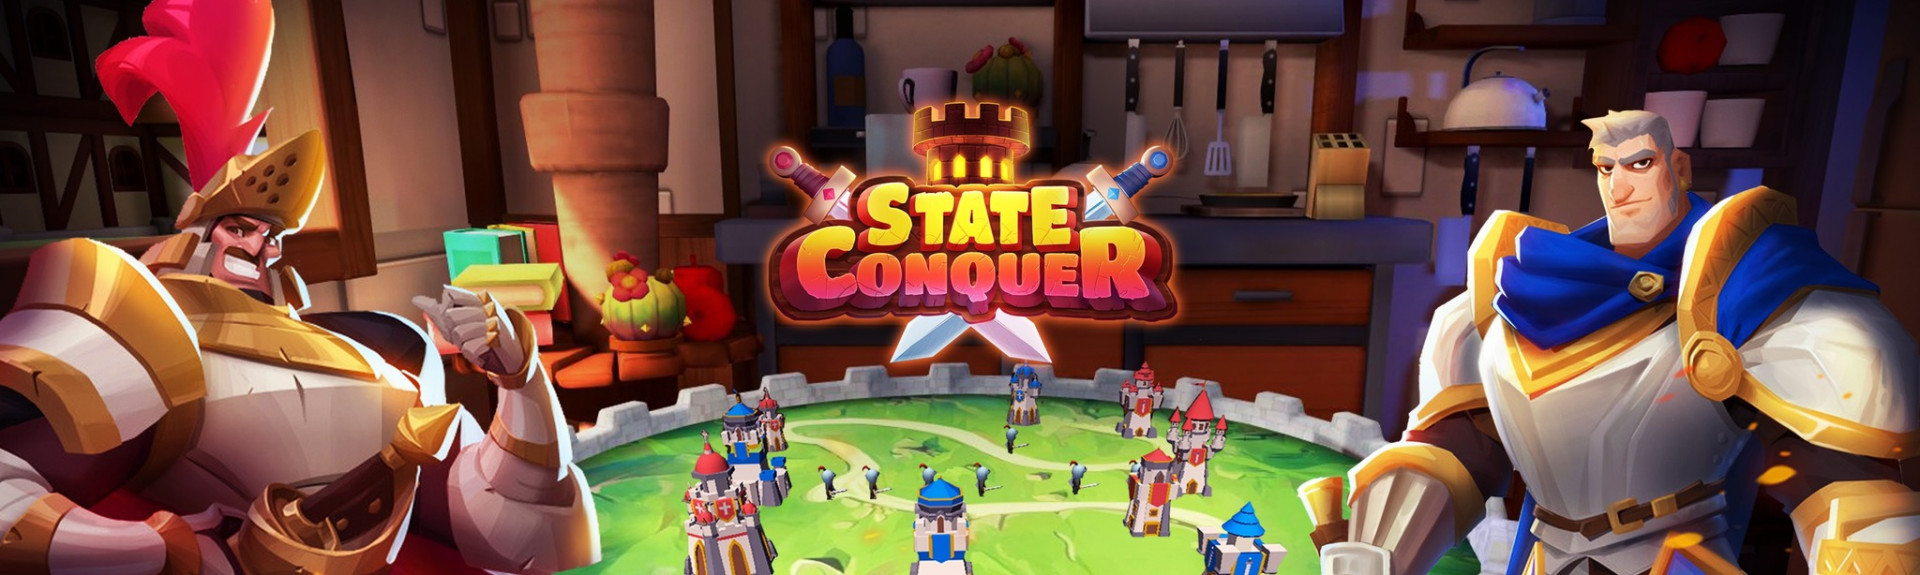 State Conquer